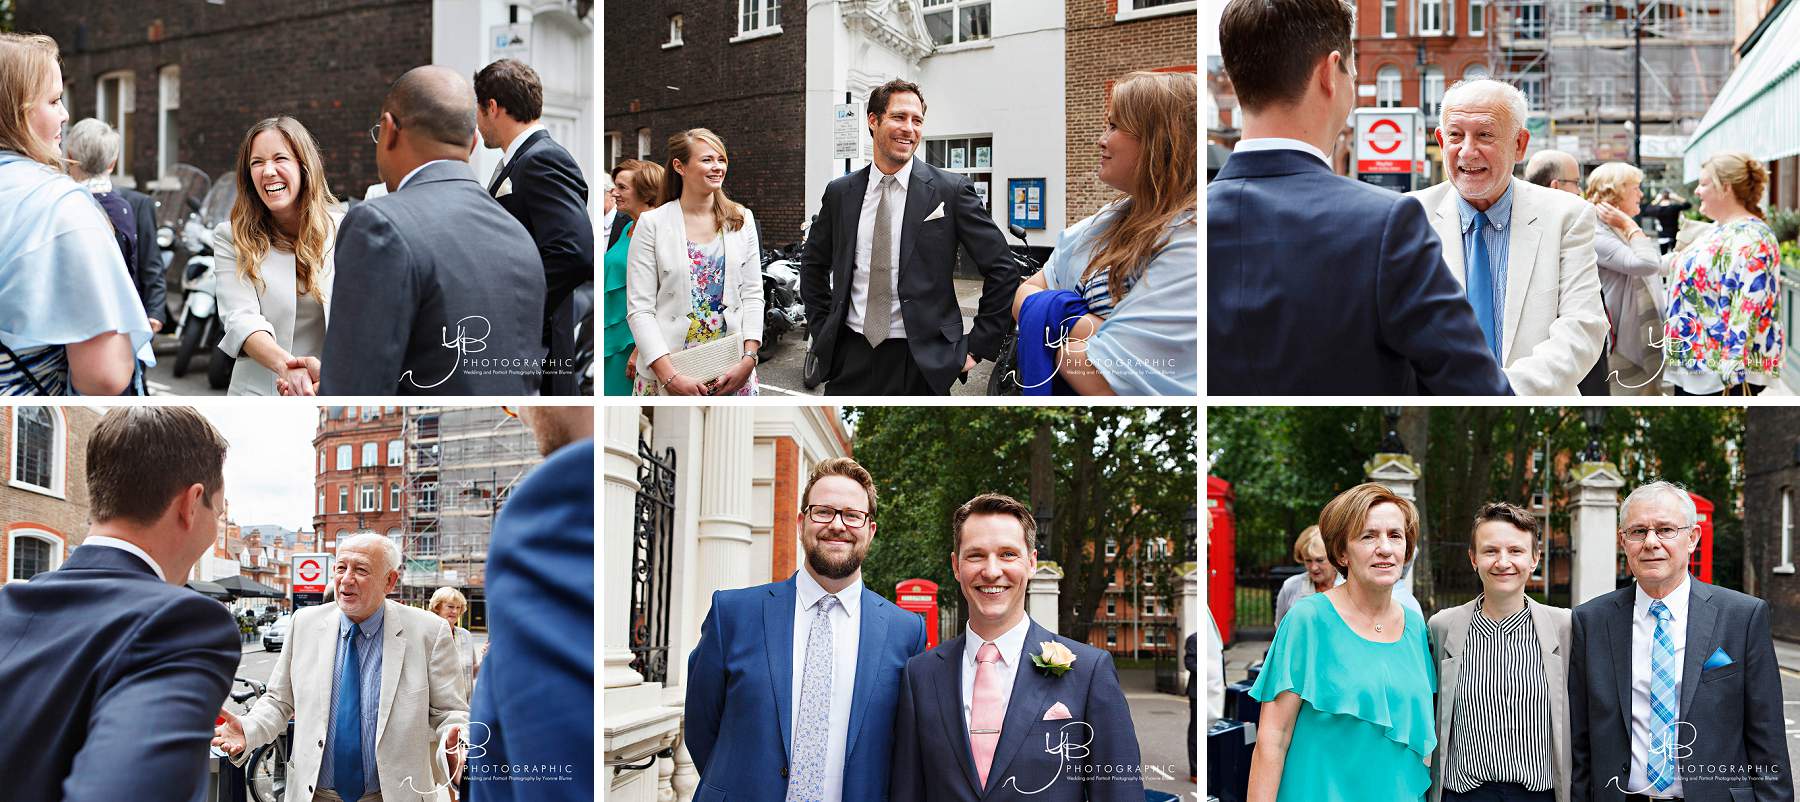 The groom and guests mingle outside Mayfair Library ahead of the wedding